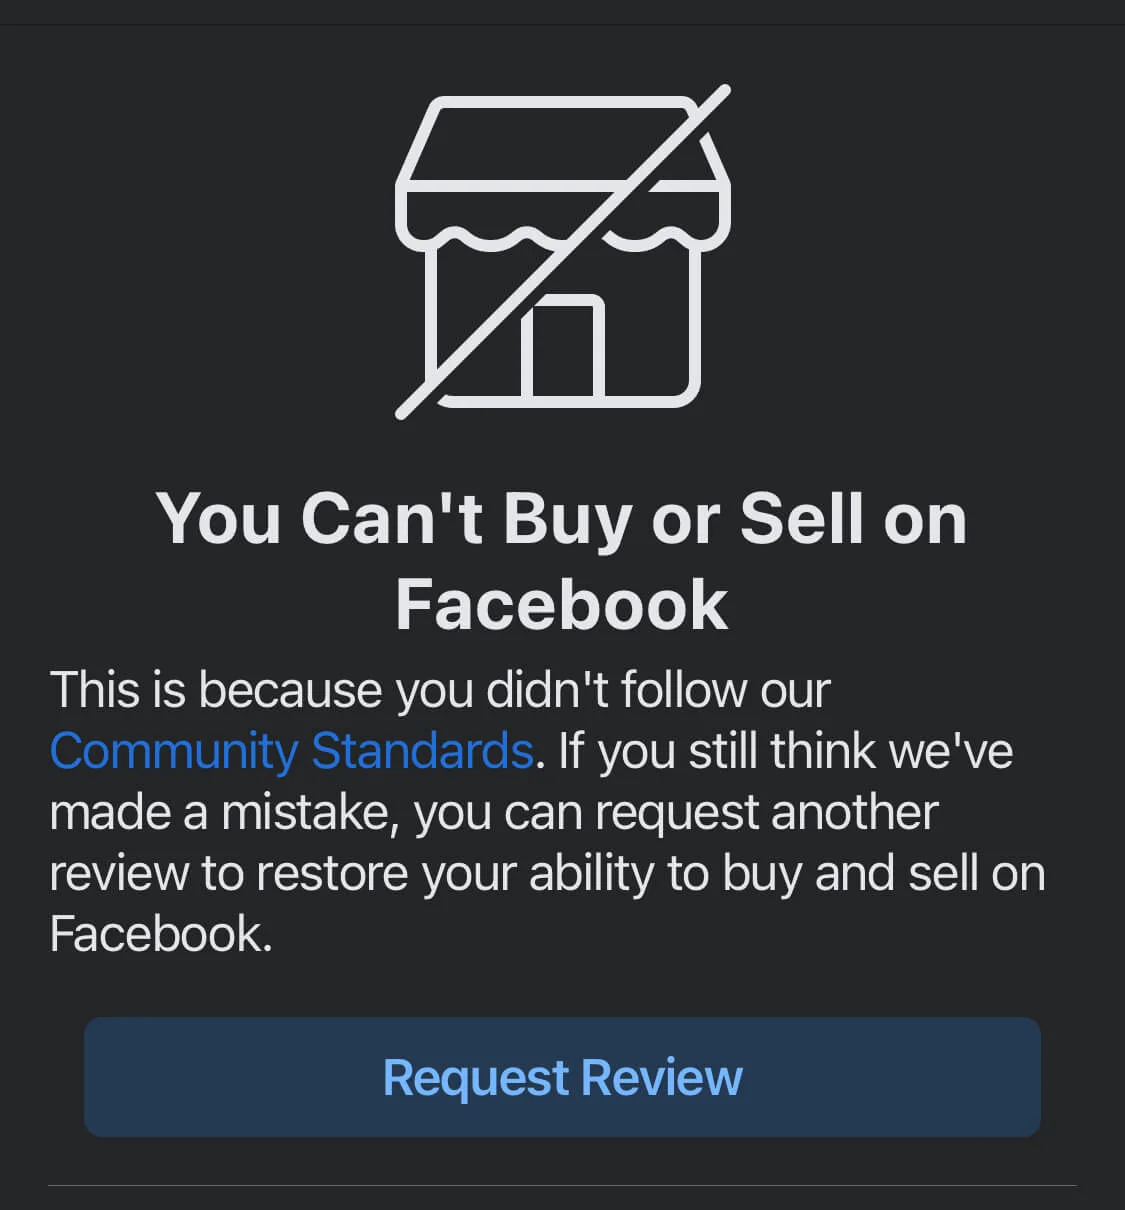 Facebook Marketplace request review